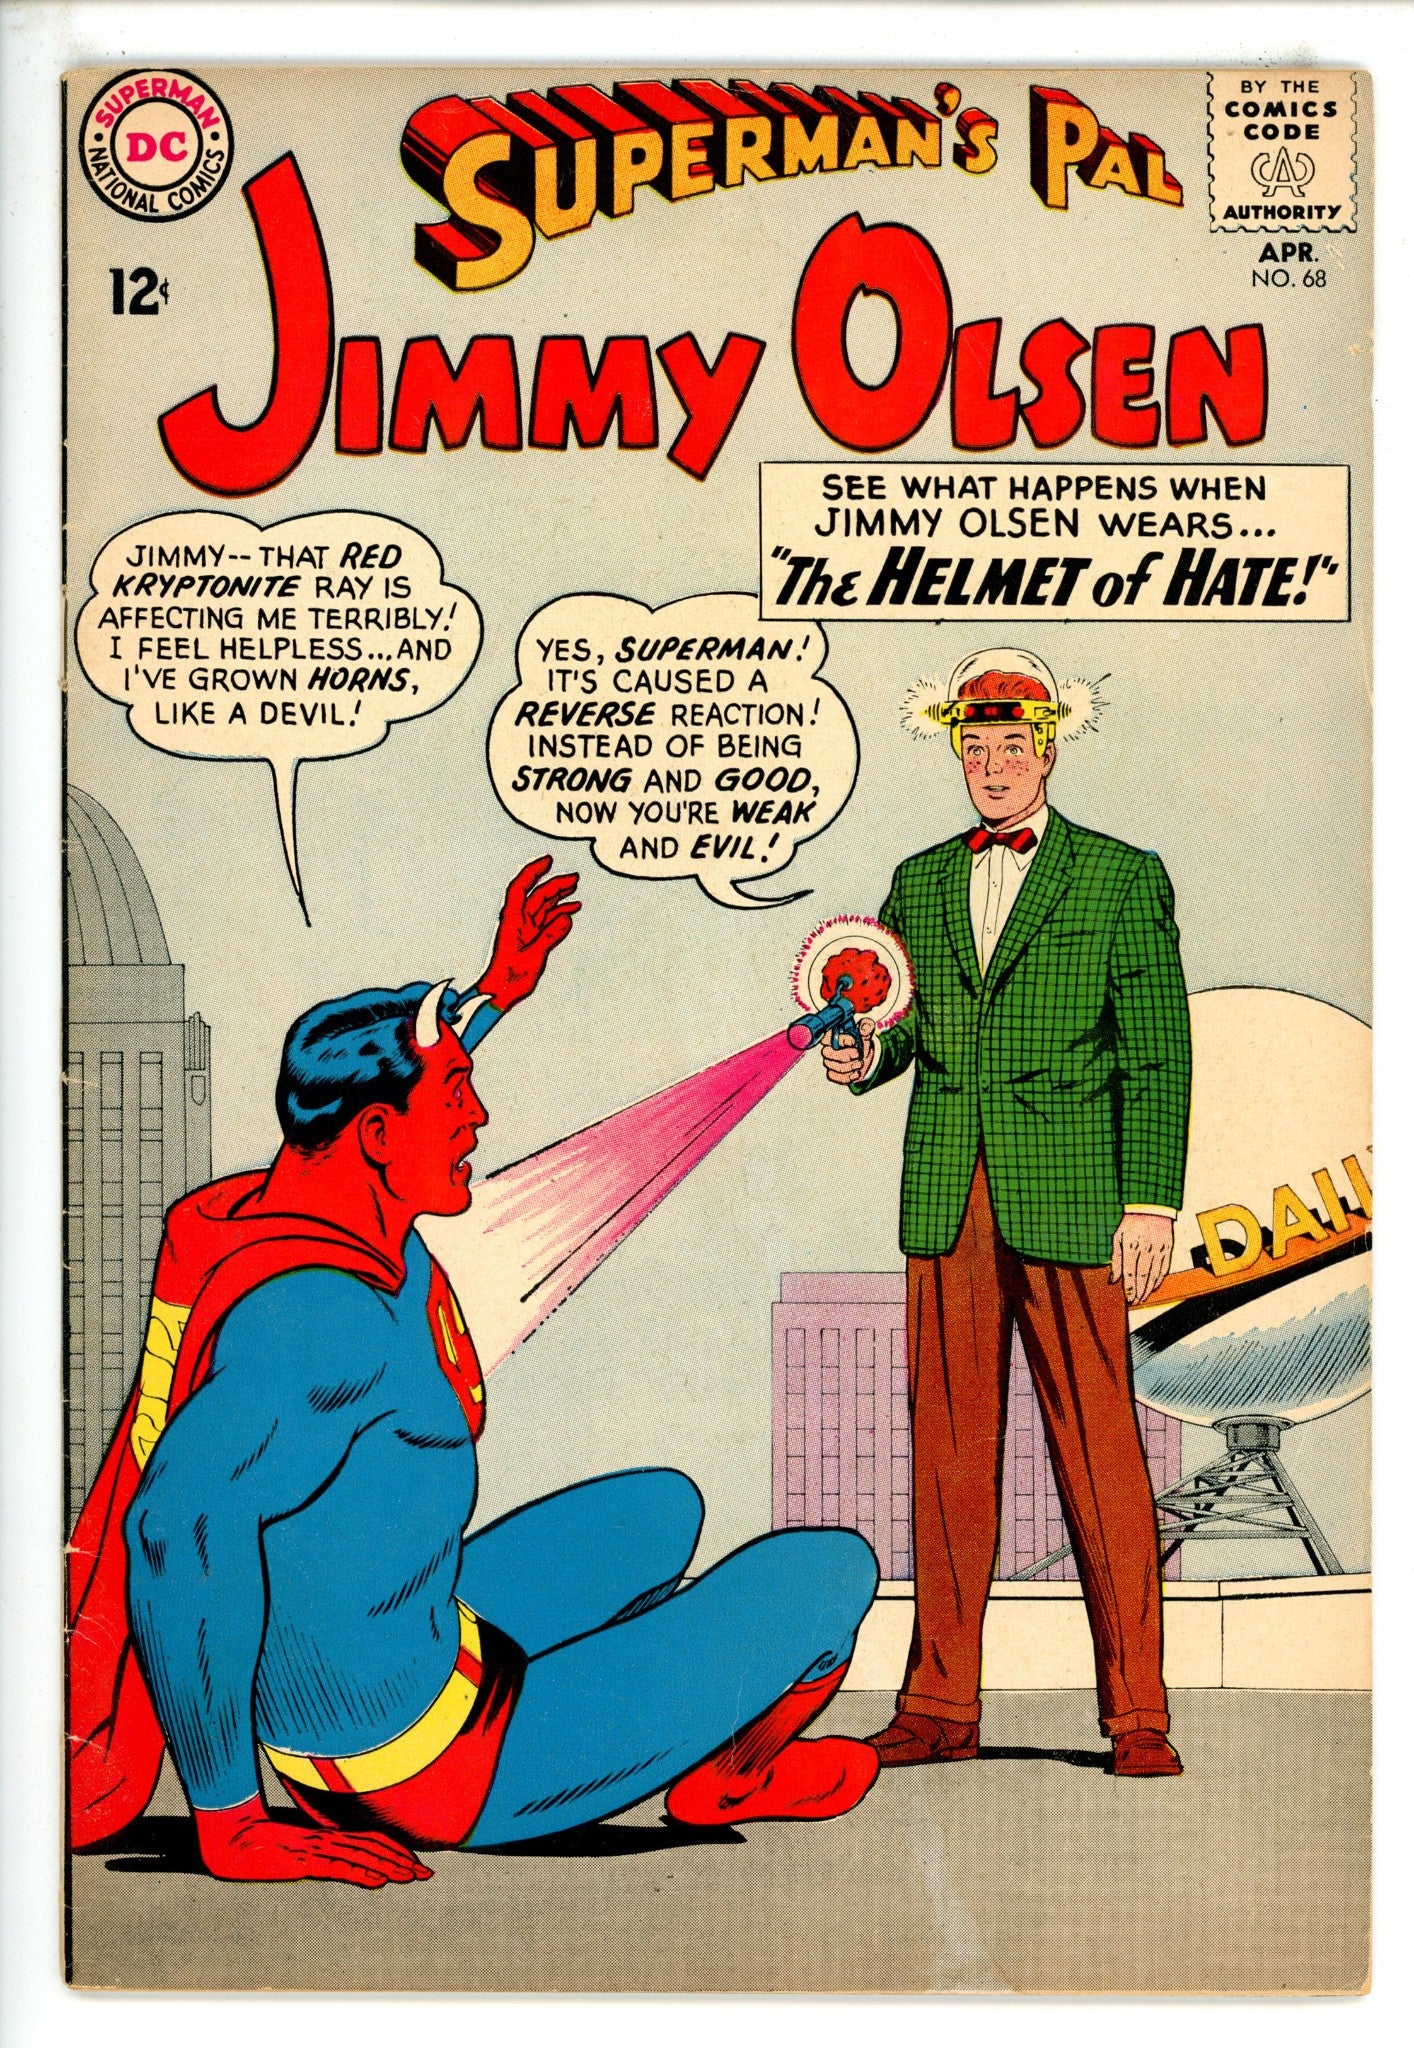 Superman's Pal, Jimmy Olsen 68 VG/FN Manufactured Without Bottom Staple (1963)